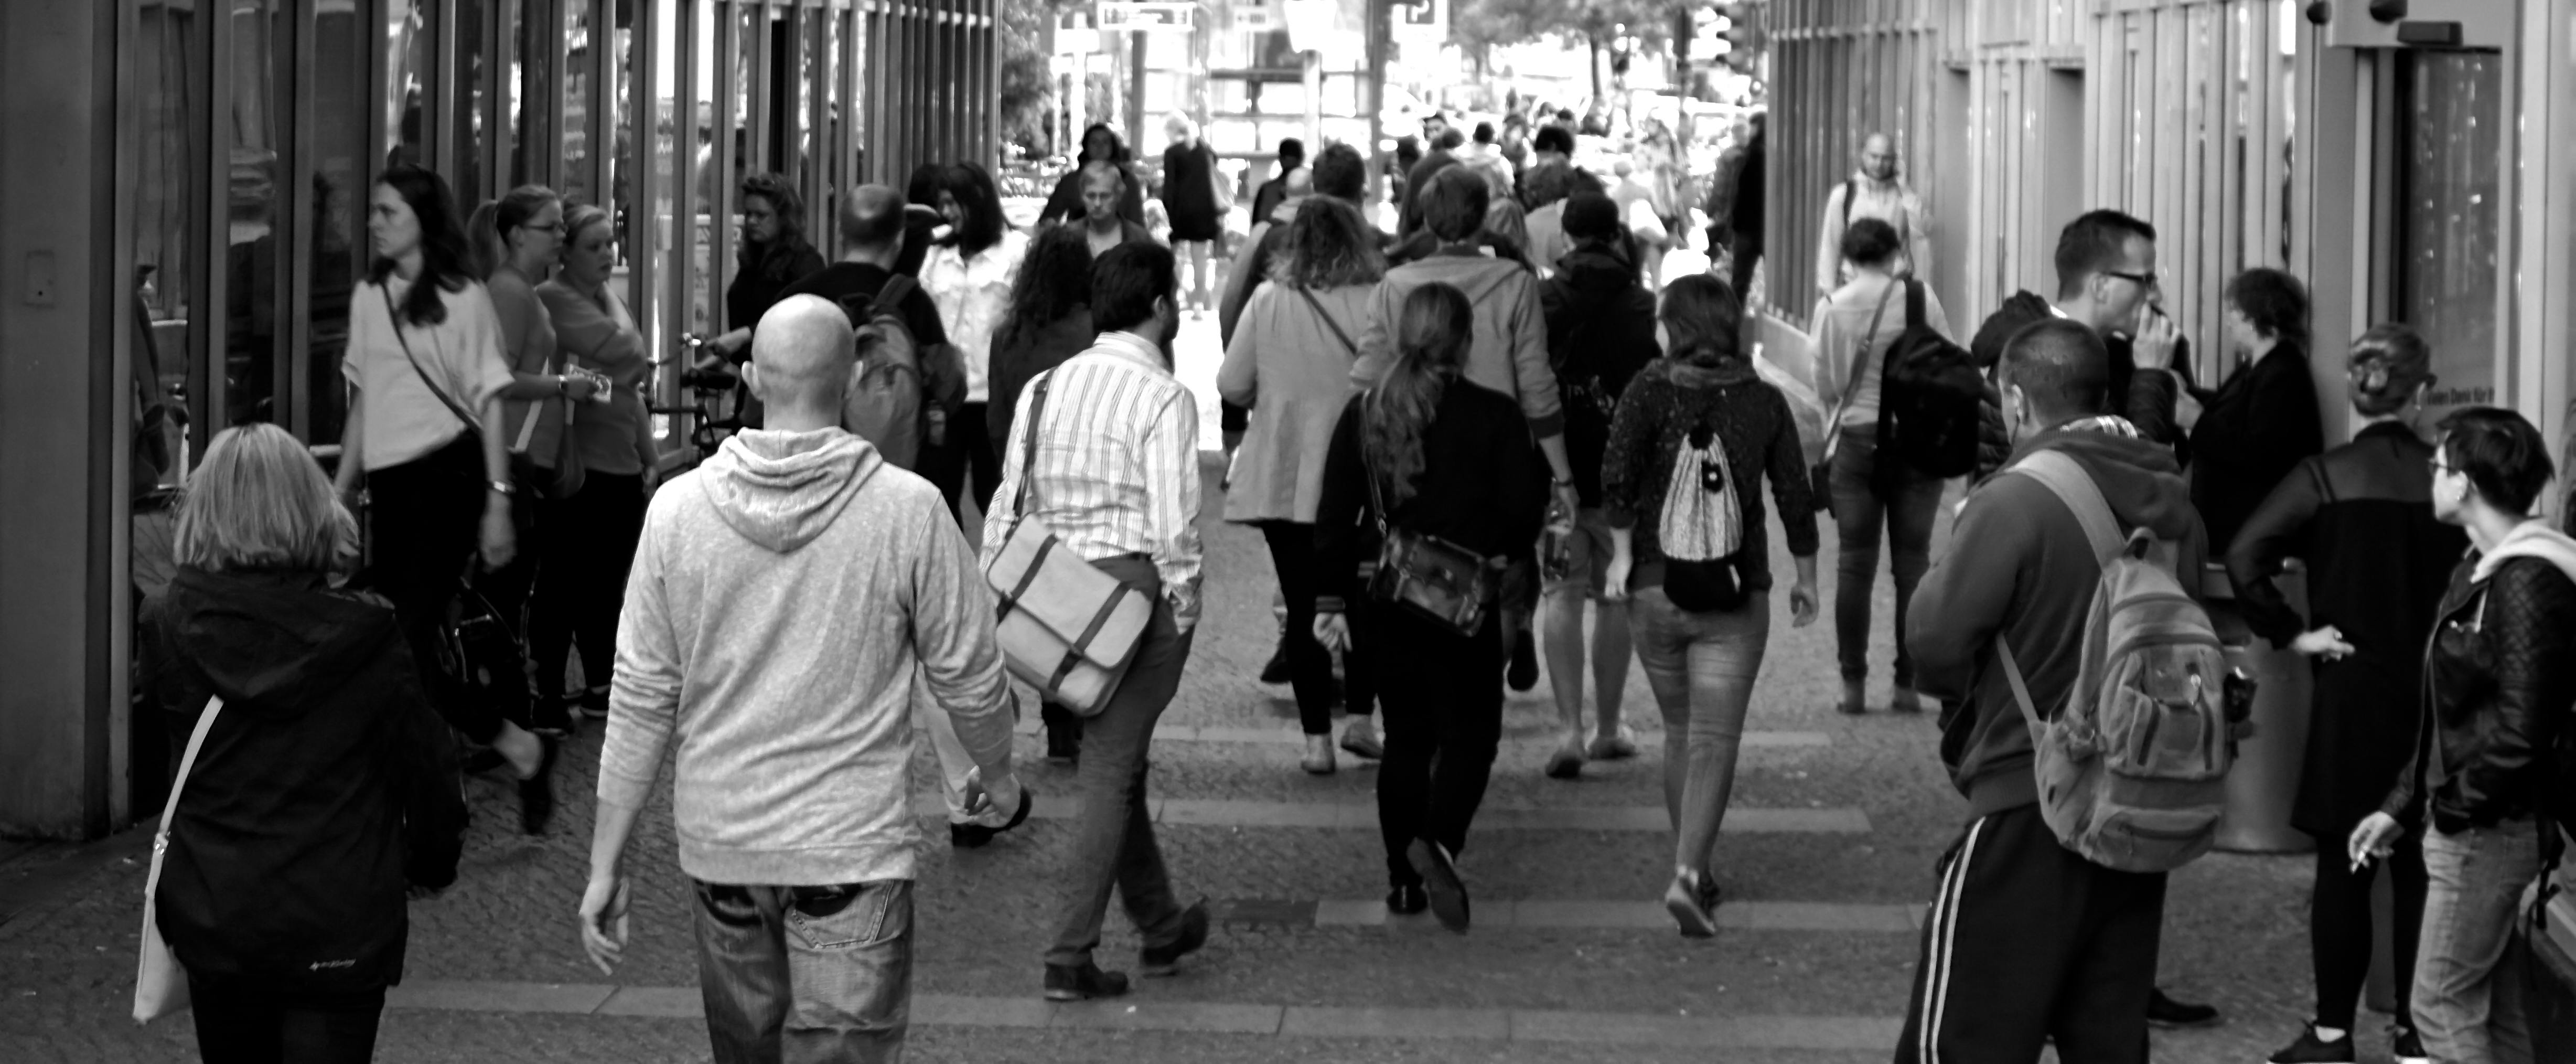 People walking on a crowded street (black and white).